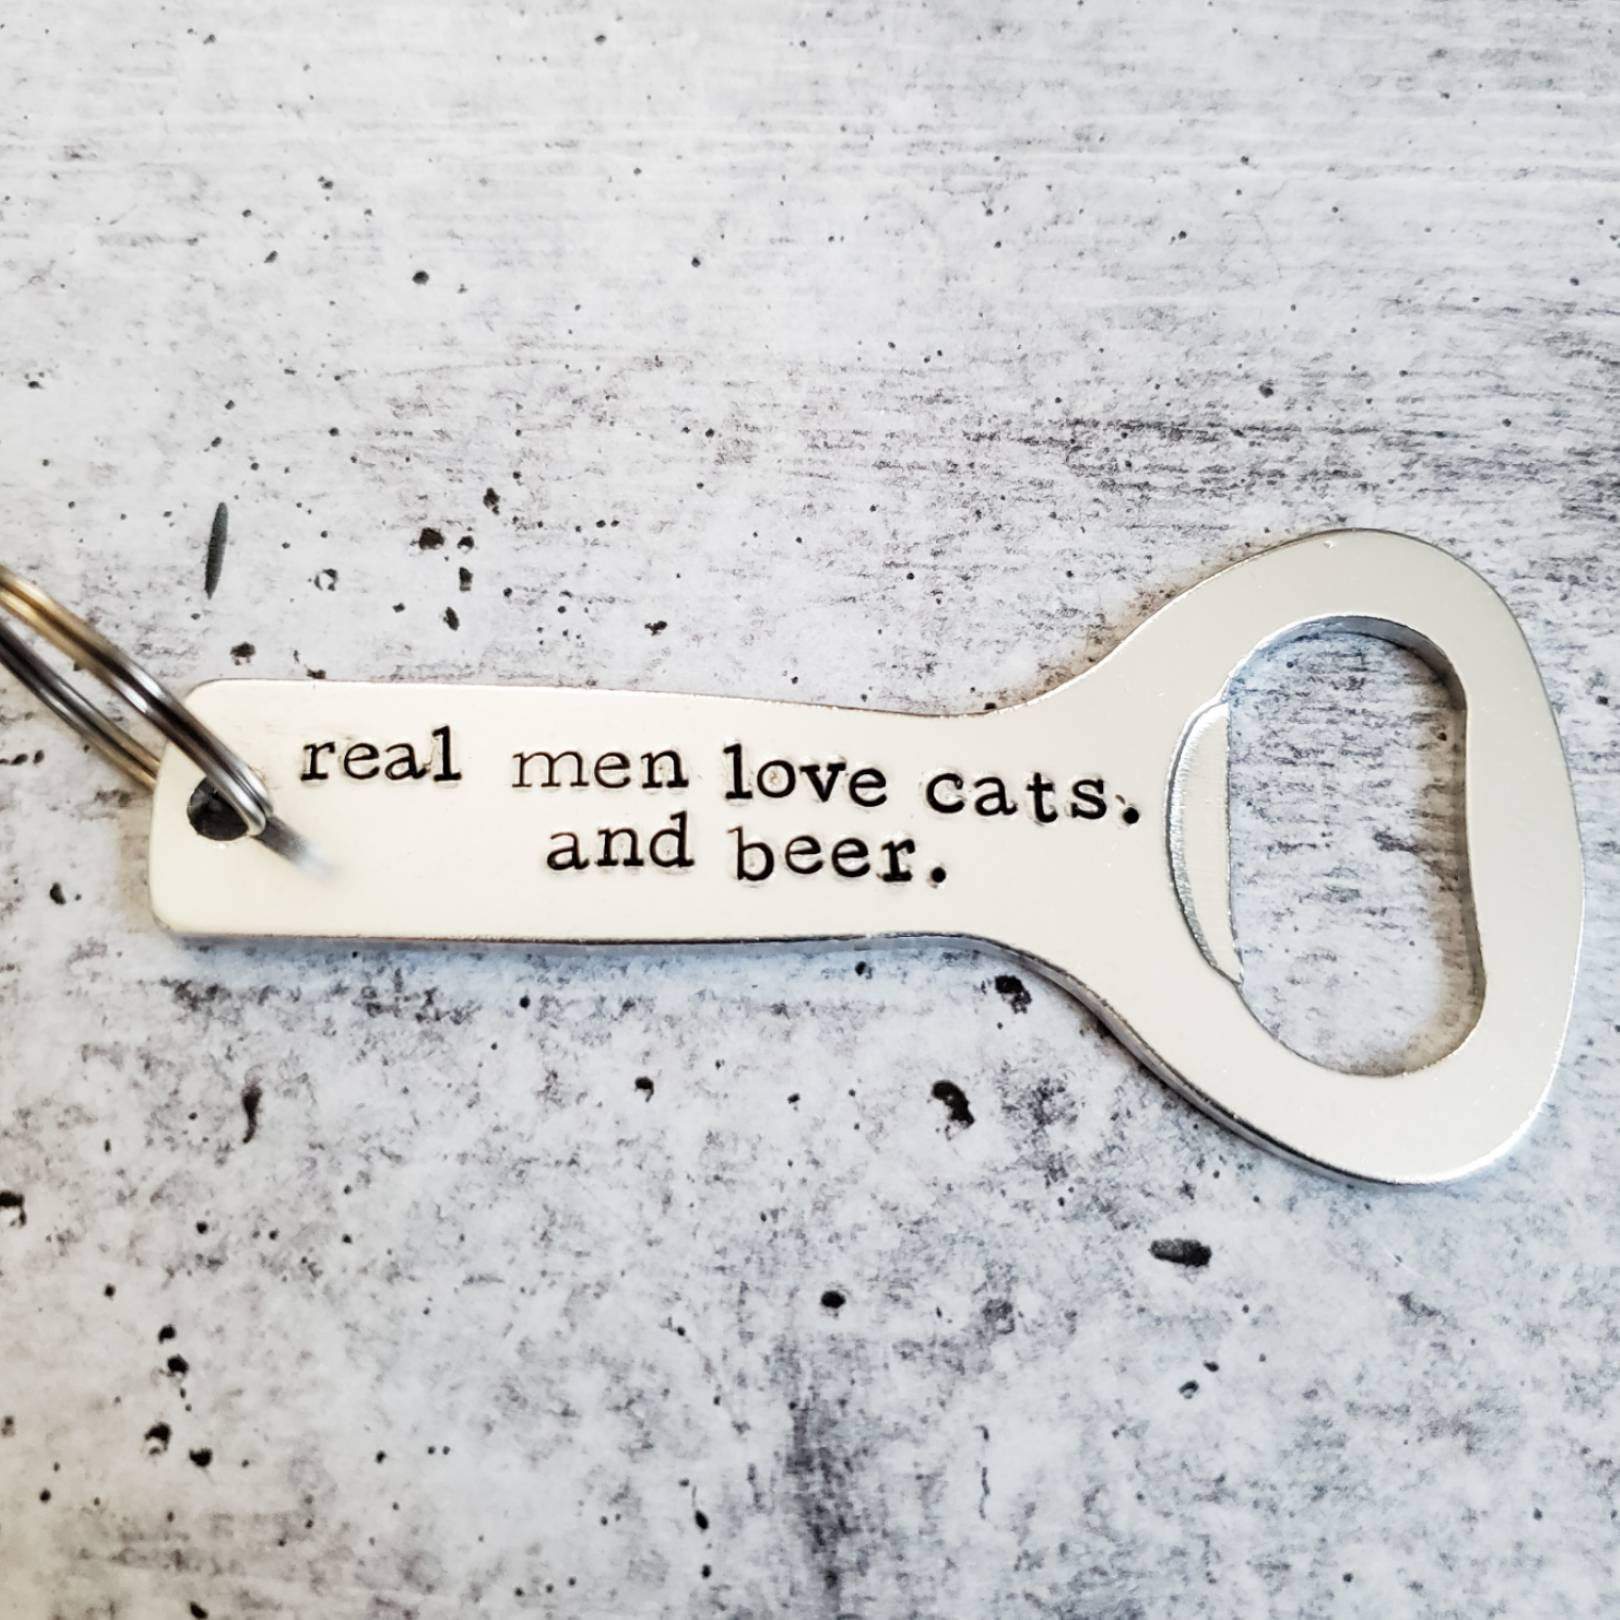 Real Men Love Cats And Beer Bottle Opener Salt and Sparkle